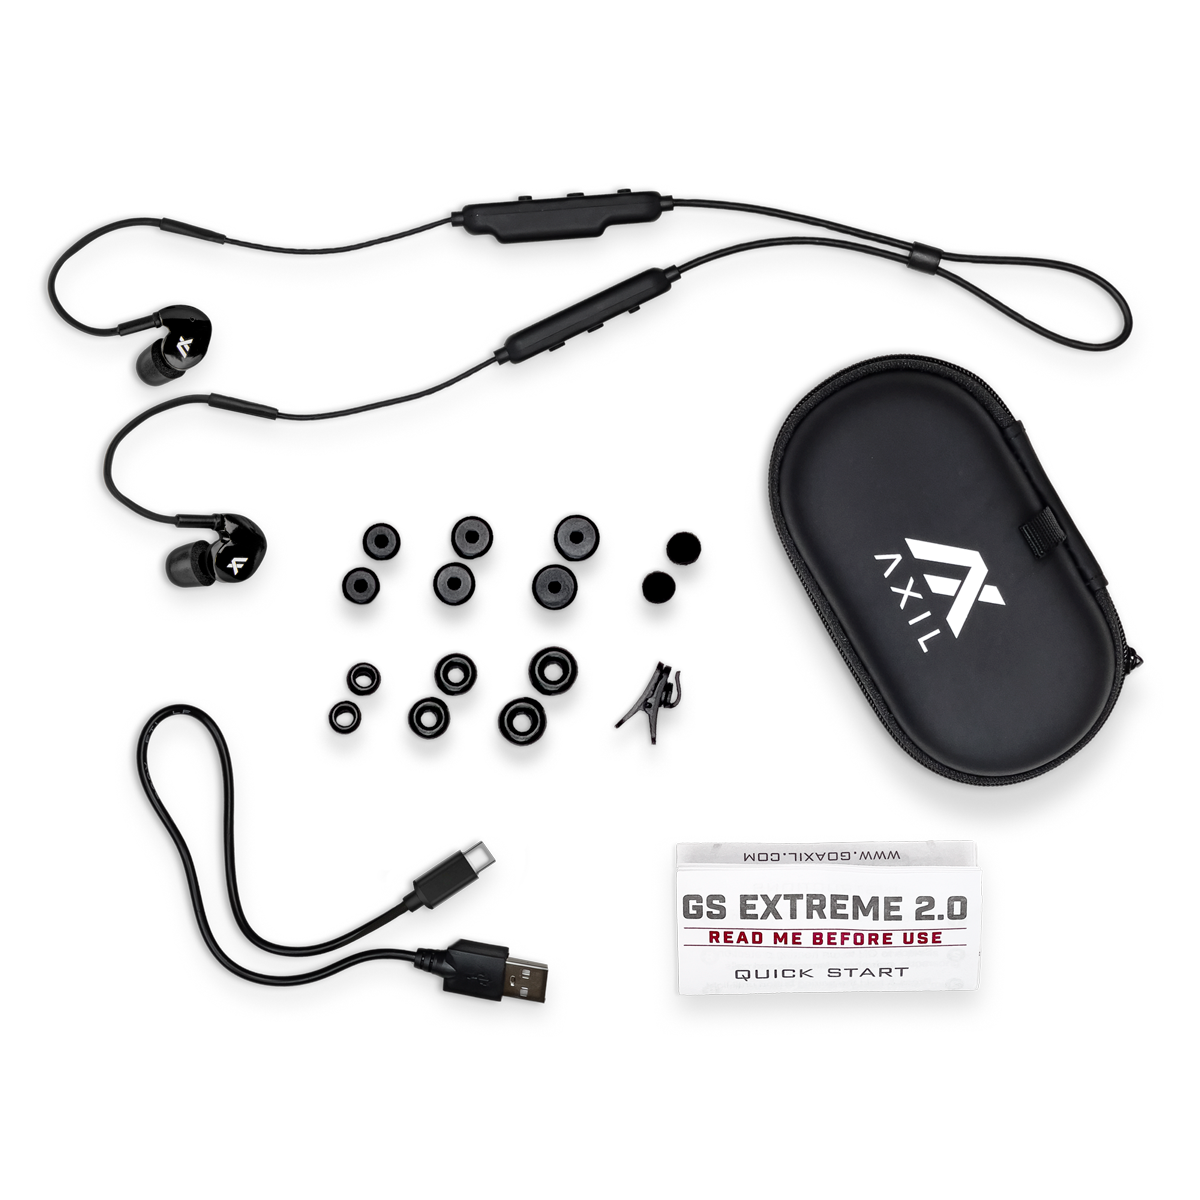 GS Extreme 2.0 – AXIL